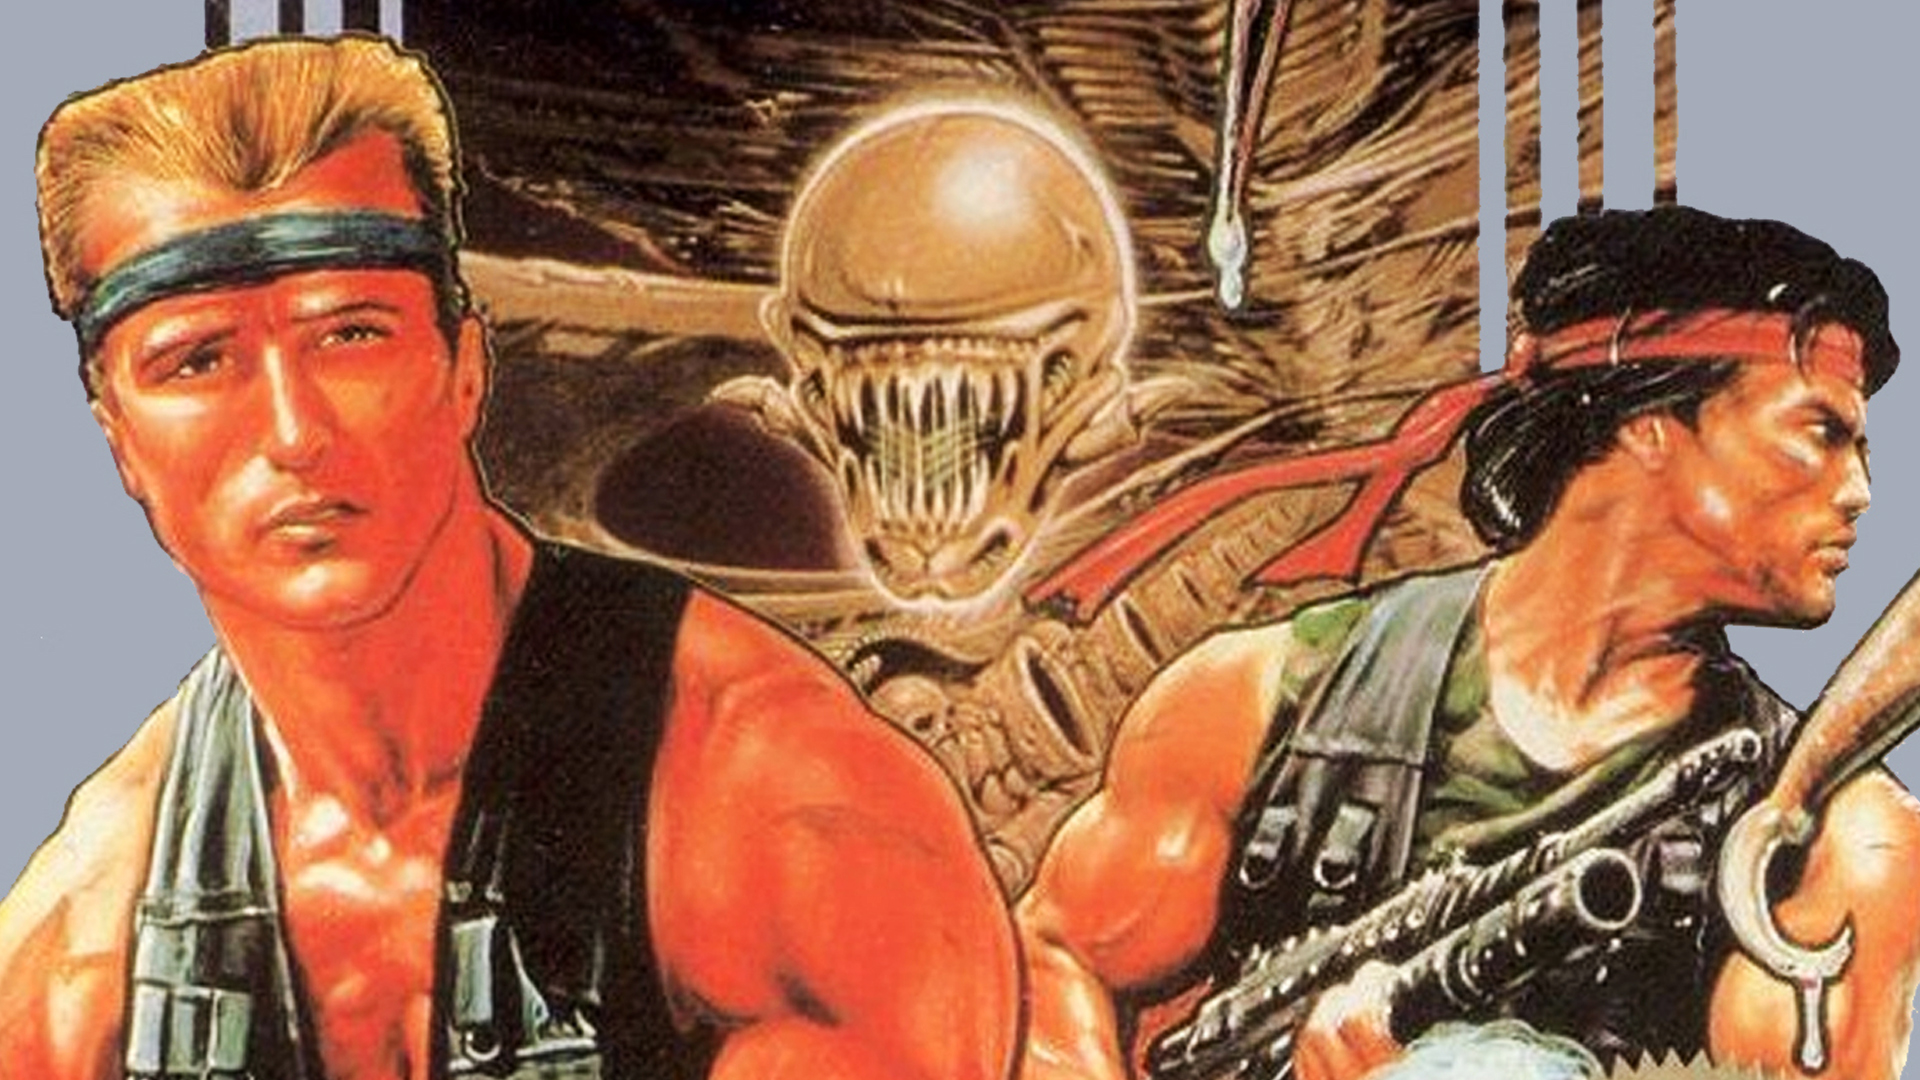 The box art for Contra on the NES